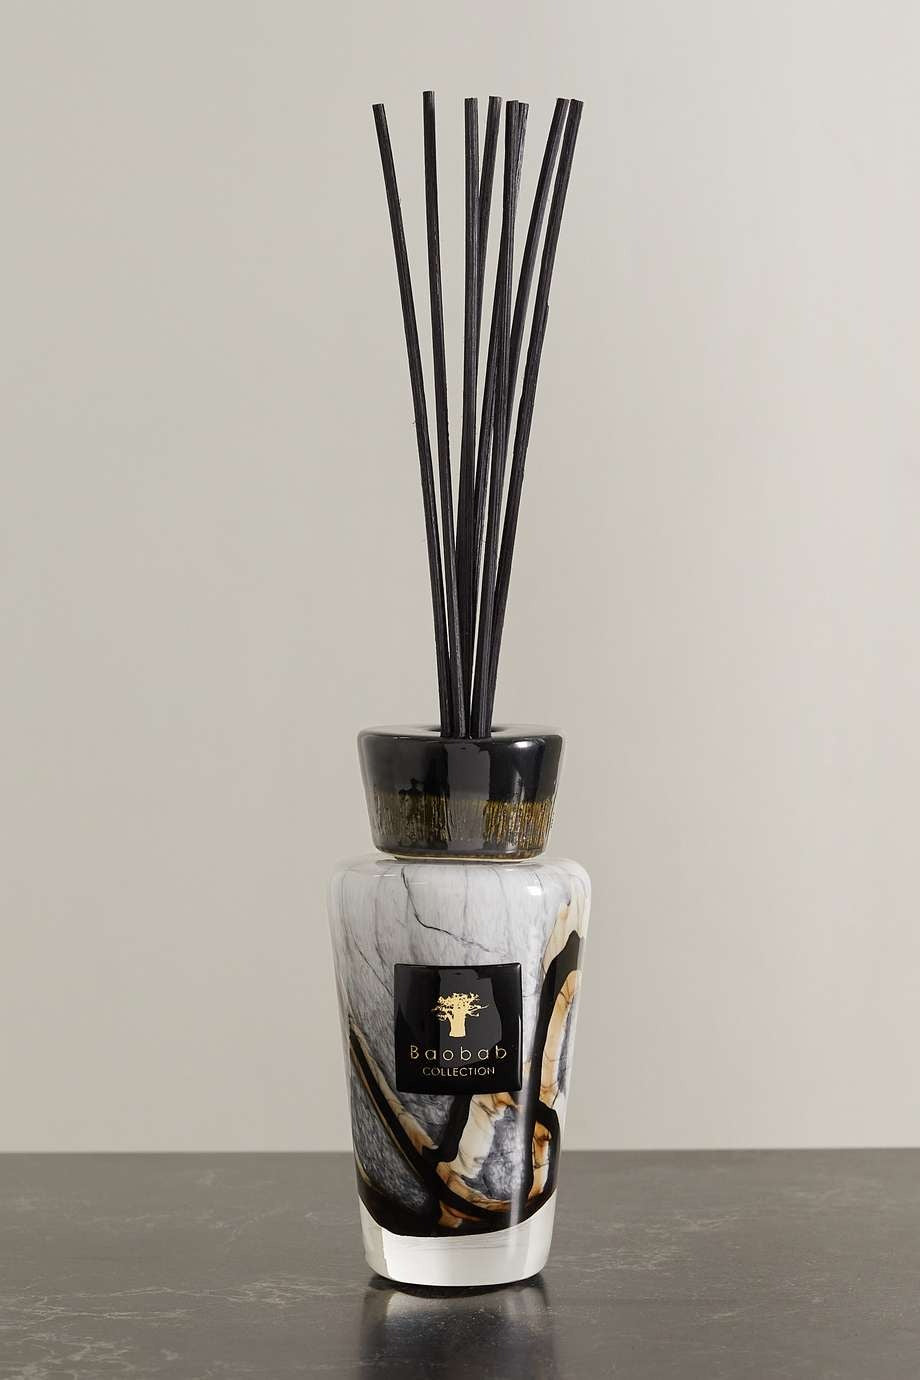 Totem Stones Marble reed diffuser 250ml